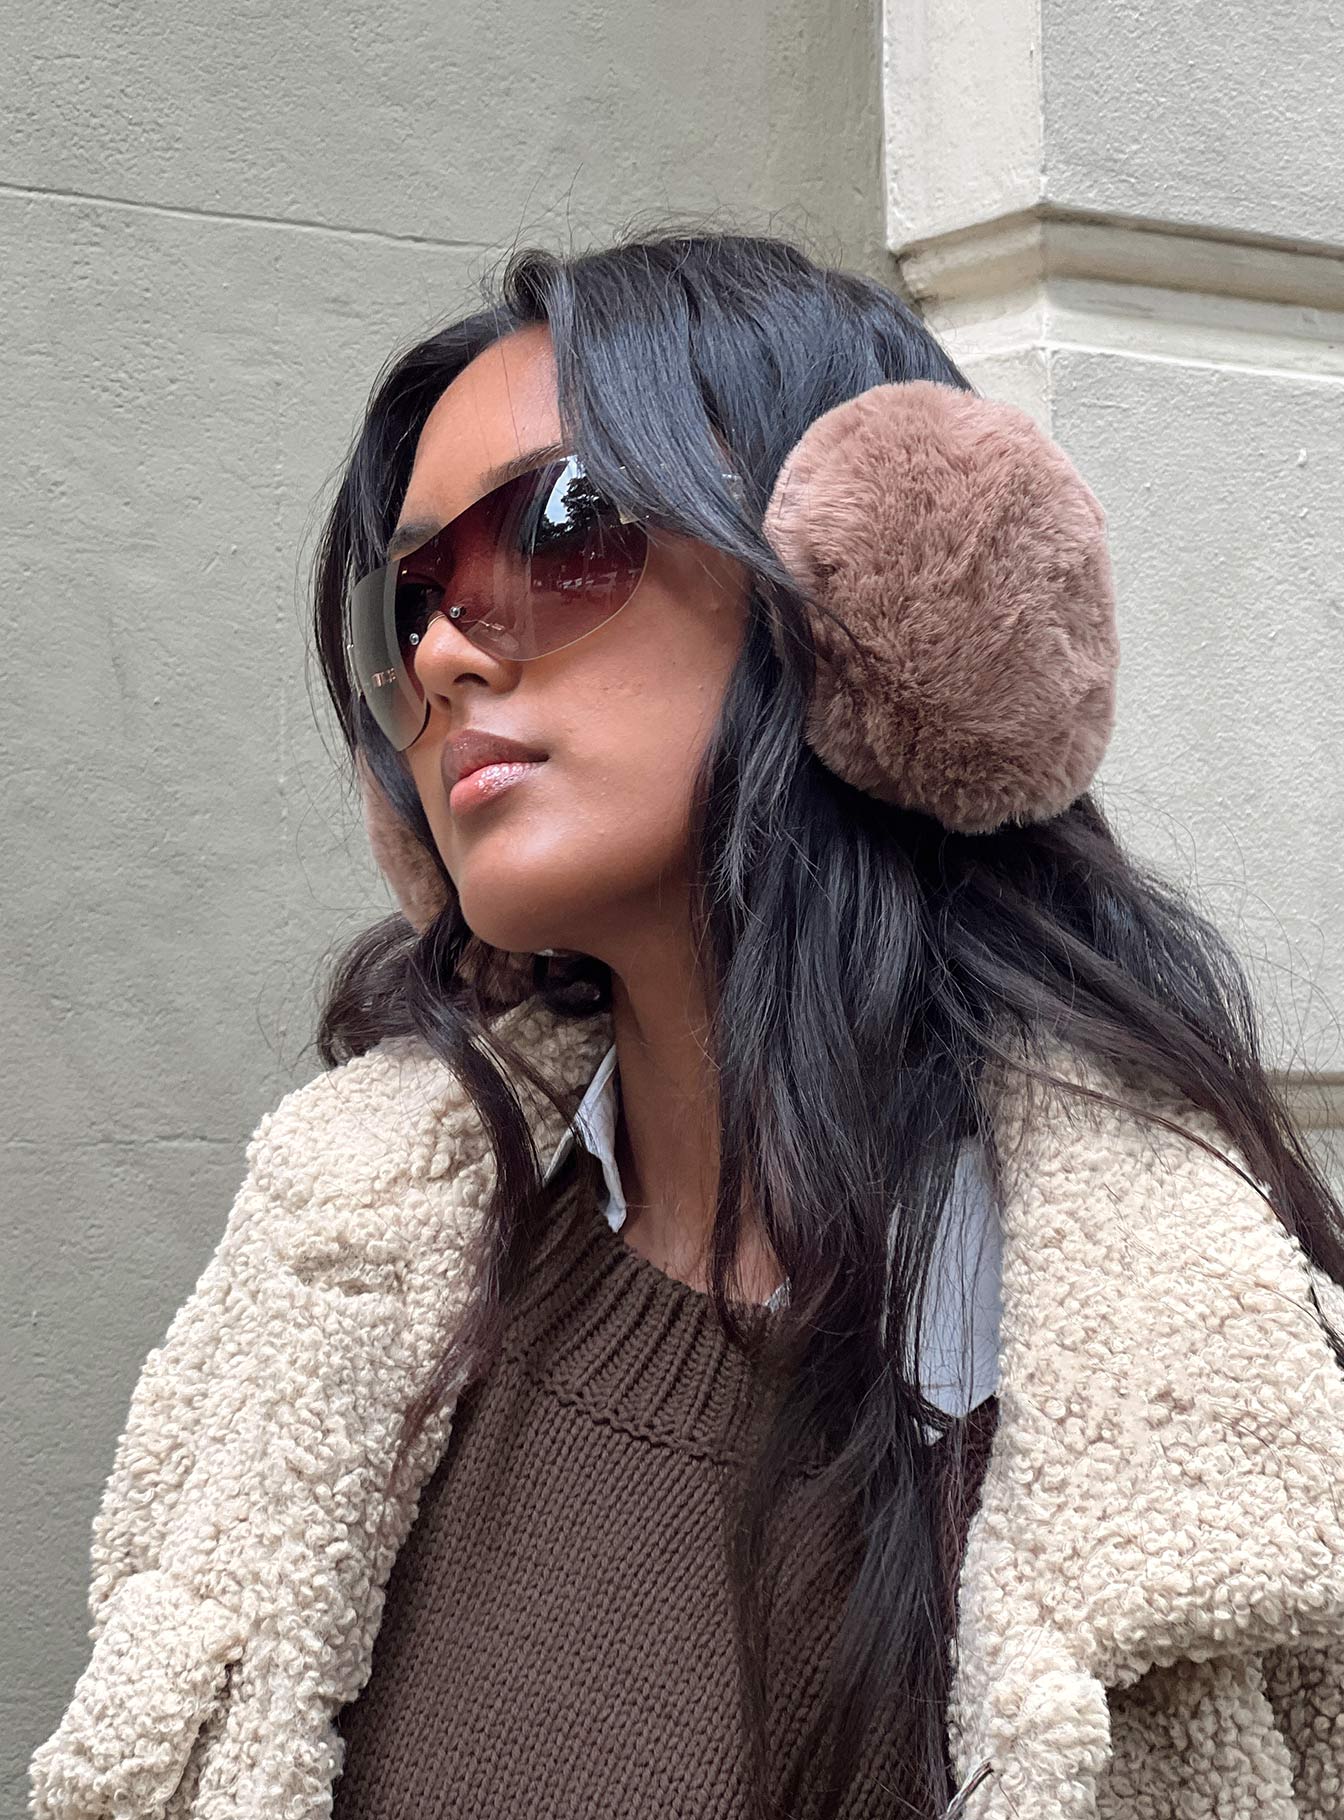 Amazon's Best-Selling Faux Fur Earmuffs Are on Sale for $12